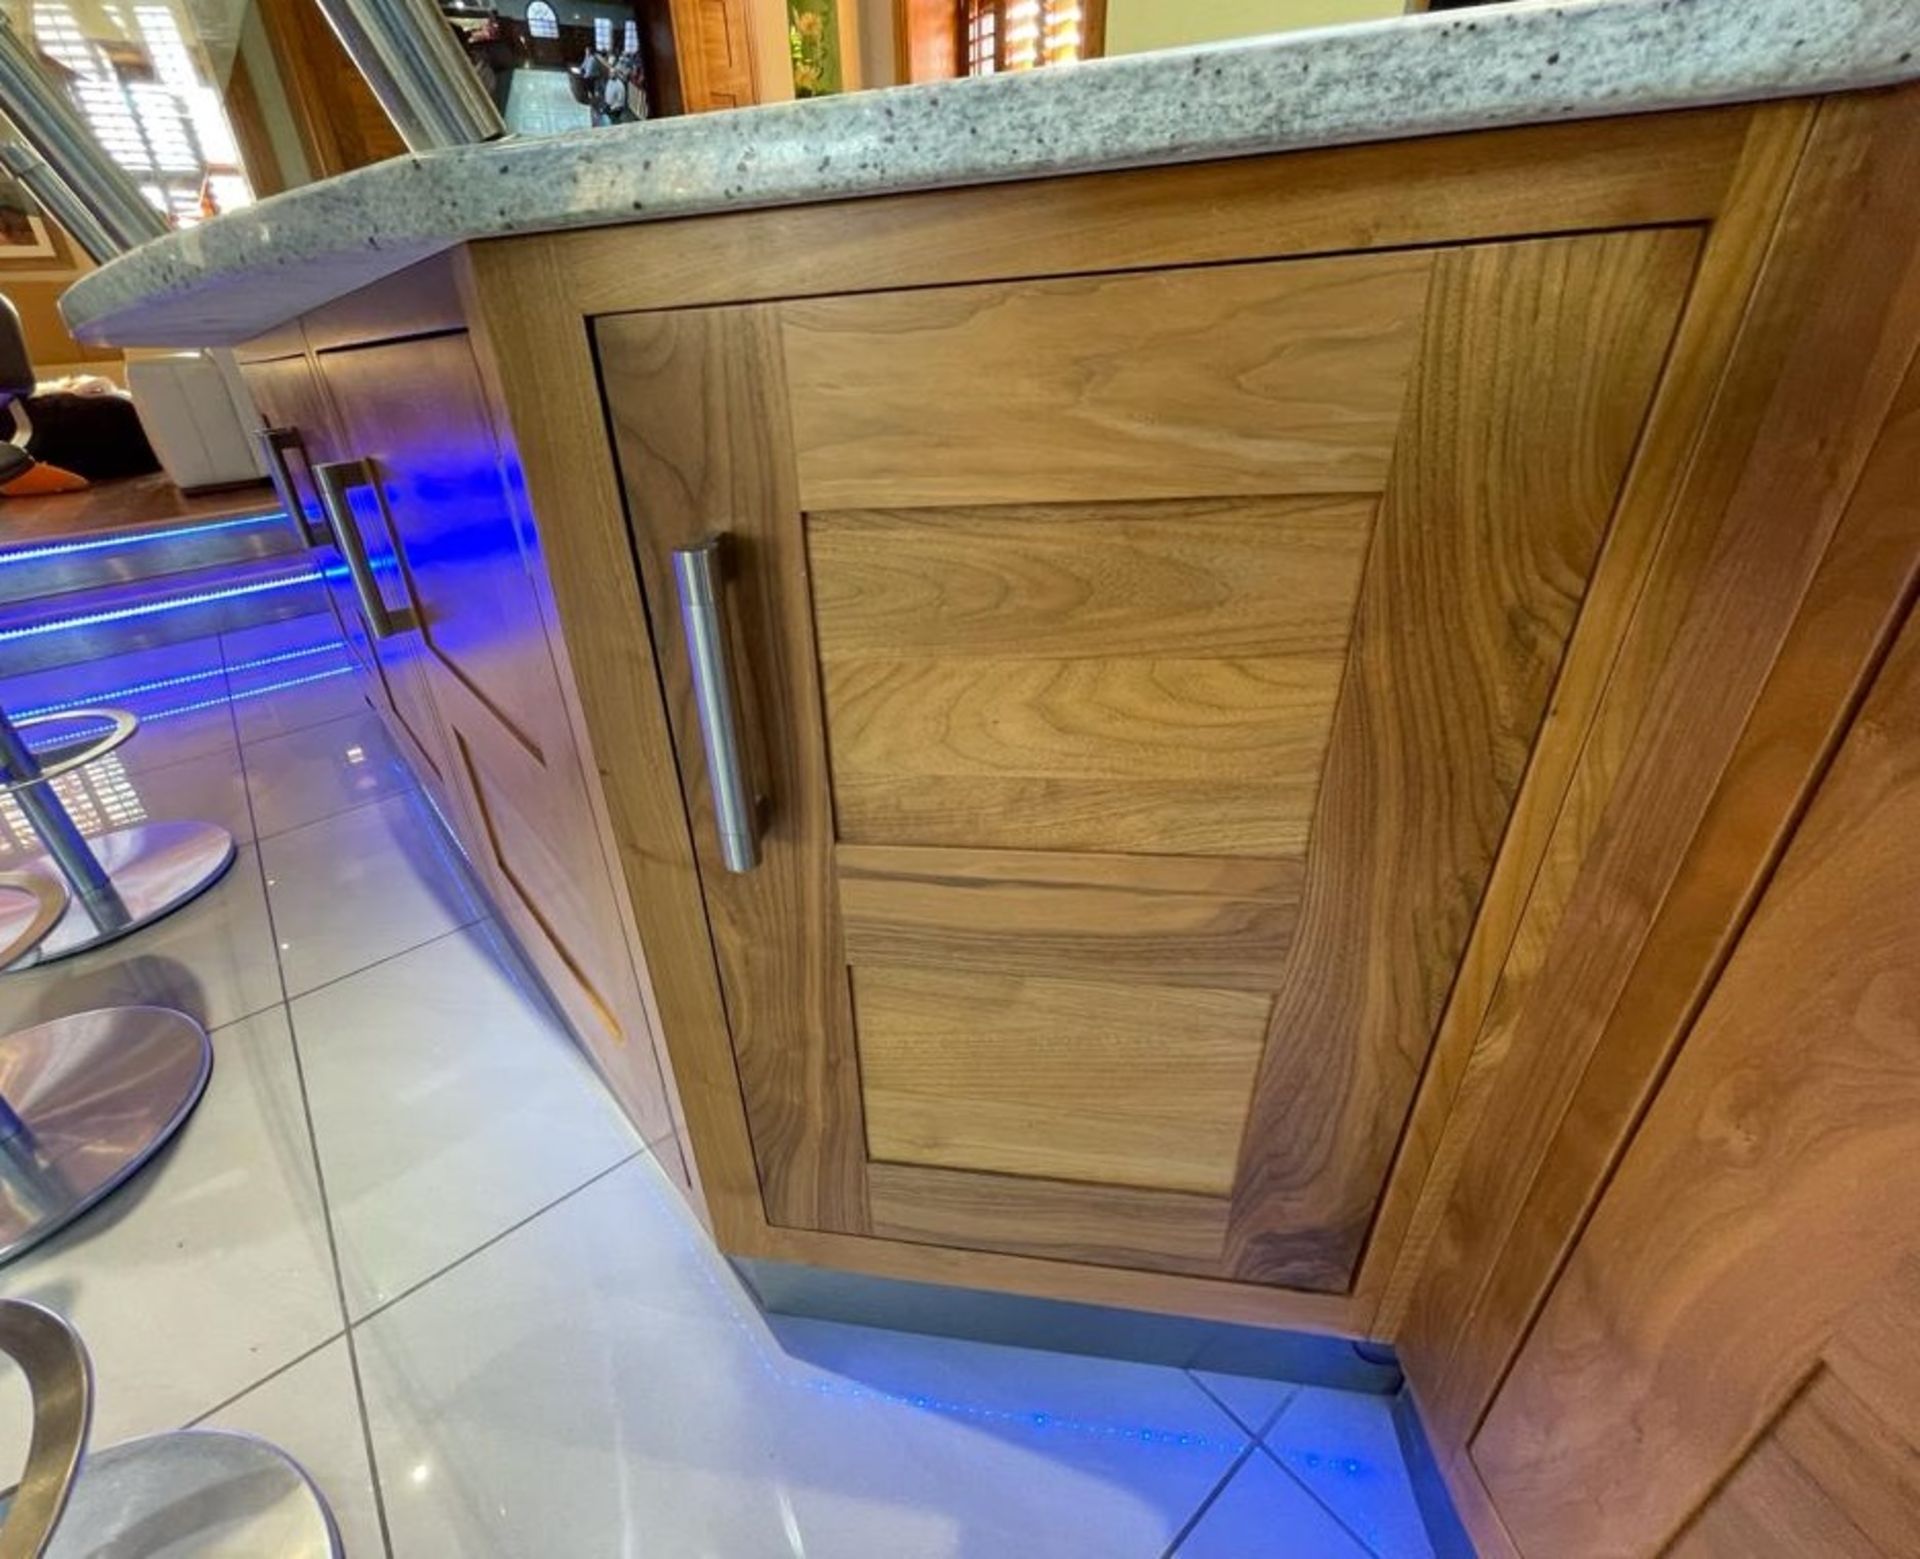 1 x Bespoke Curved Fitted Kitchen With Solid Wood Walnut Doors, Integrated Appliances, Granite Tops - Image 144 of 147